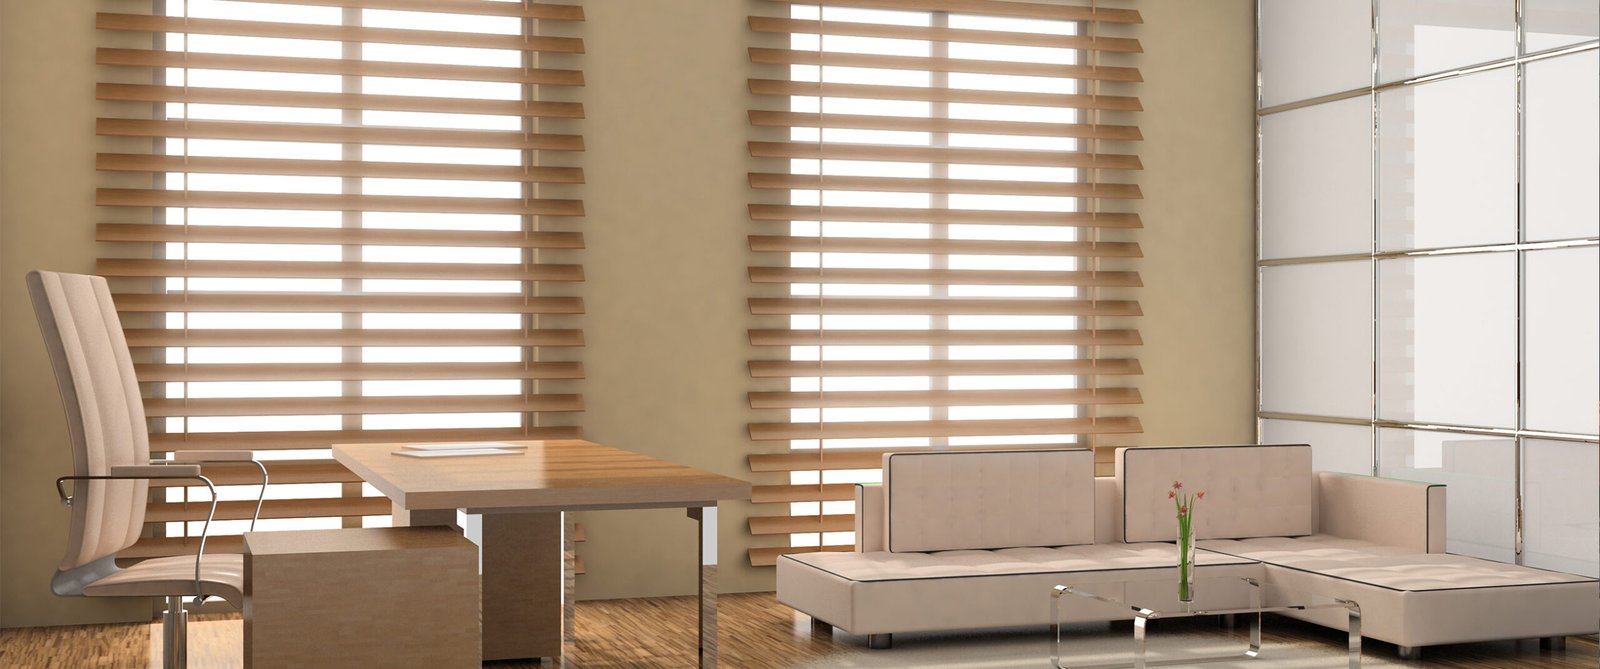 7 Ways Blinds & Shutters Can Improve Your Home’s Energy Efficiency